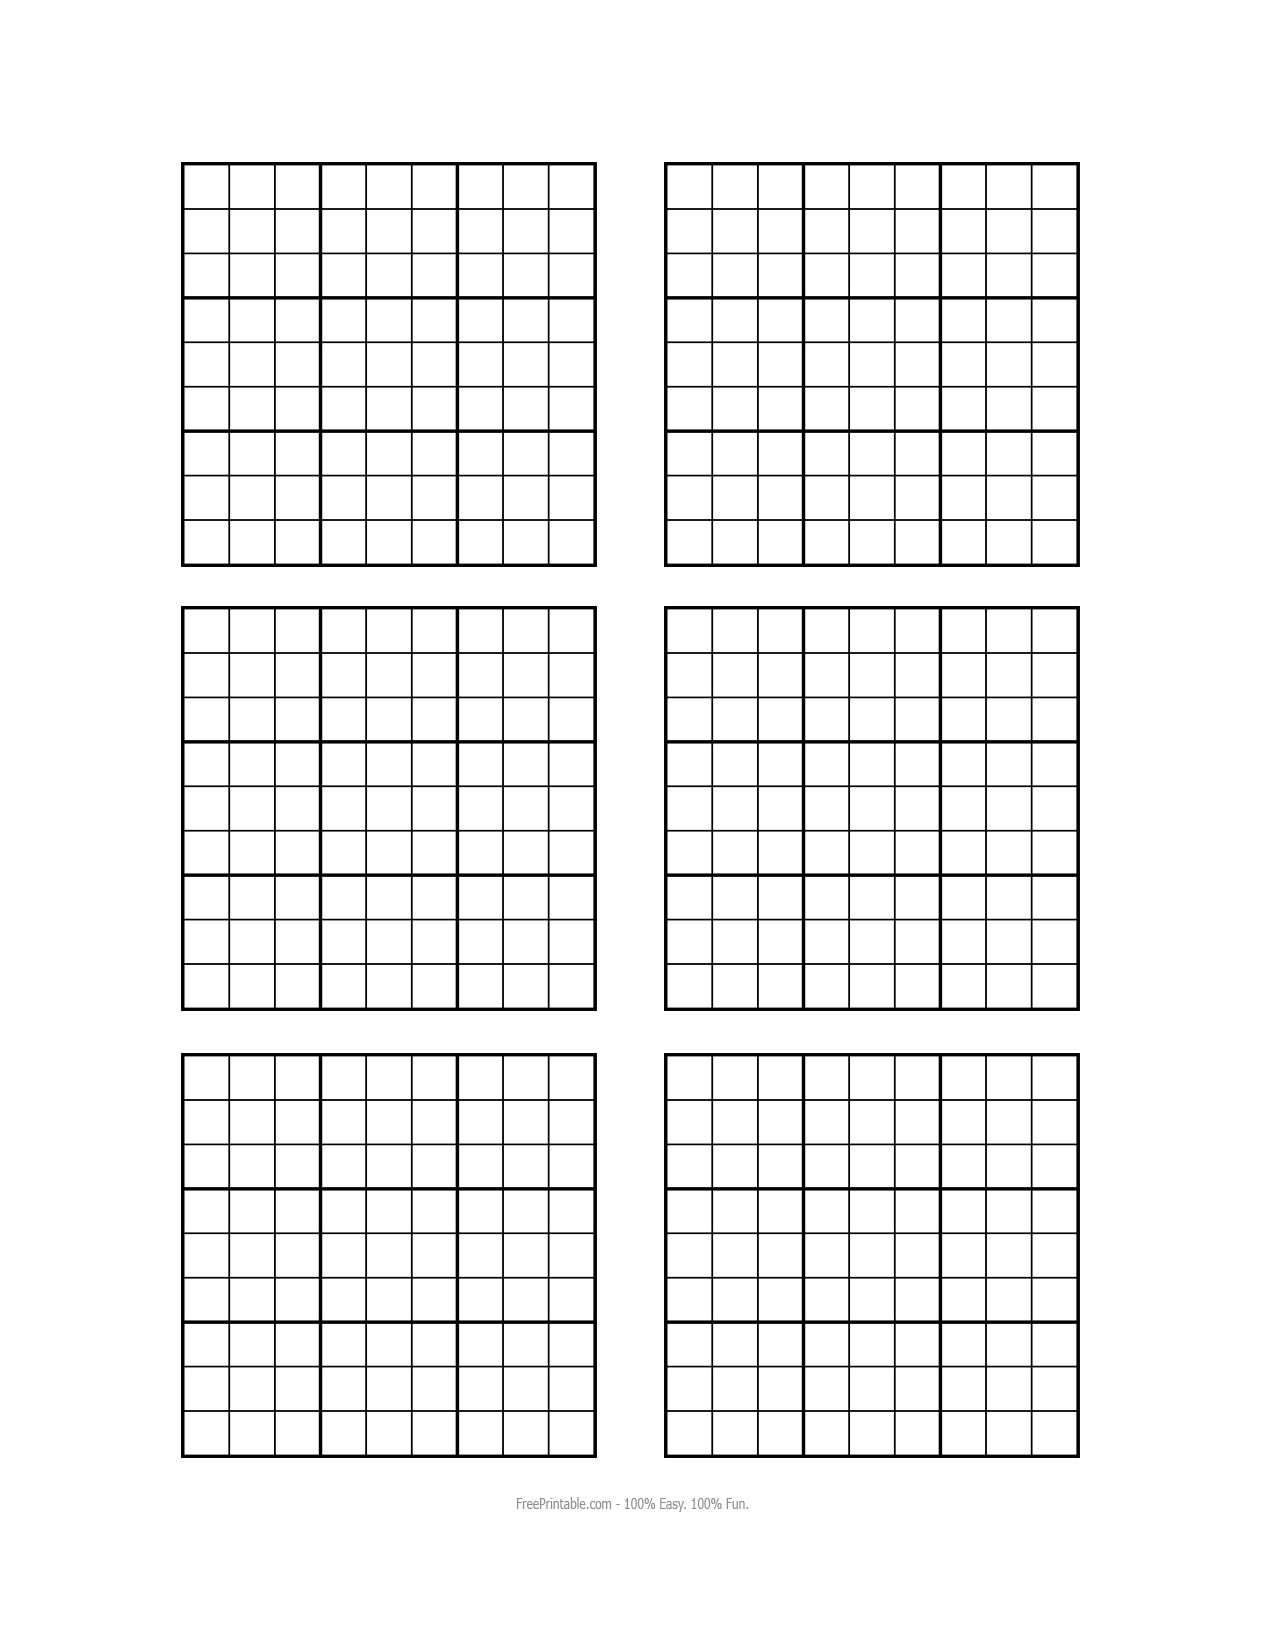 5-best-images-of-blank-sudoku-grids-printable-4-x-4-grids-free-print